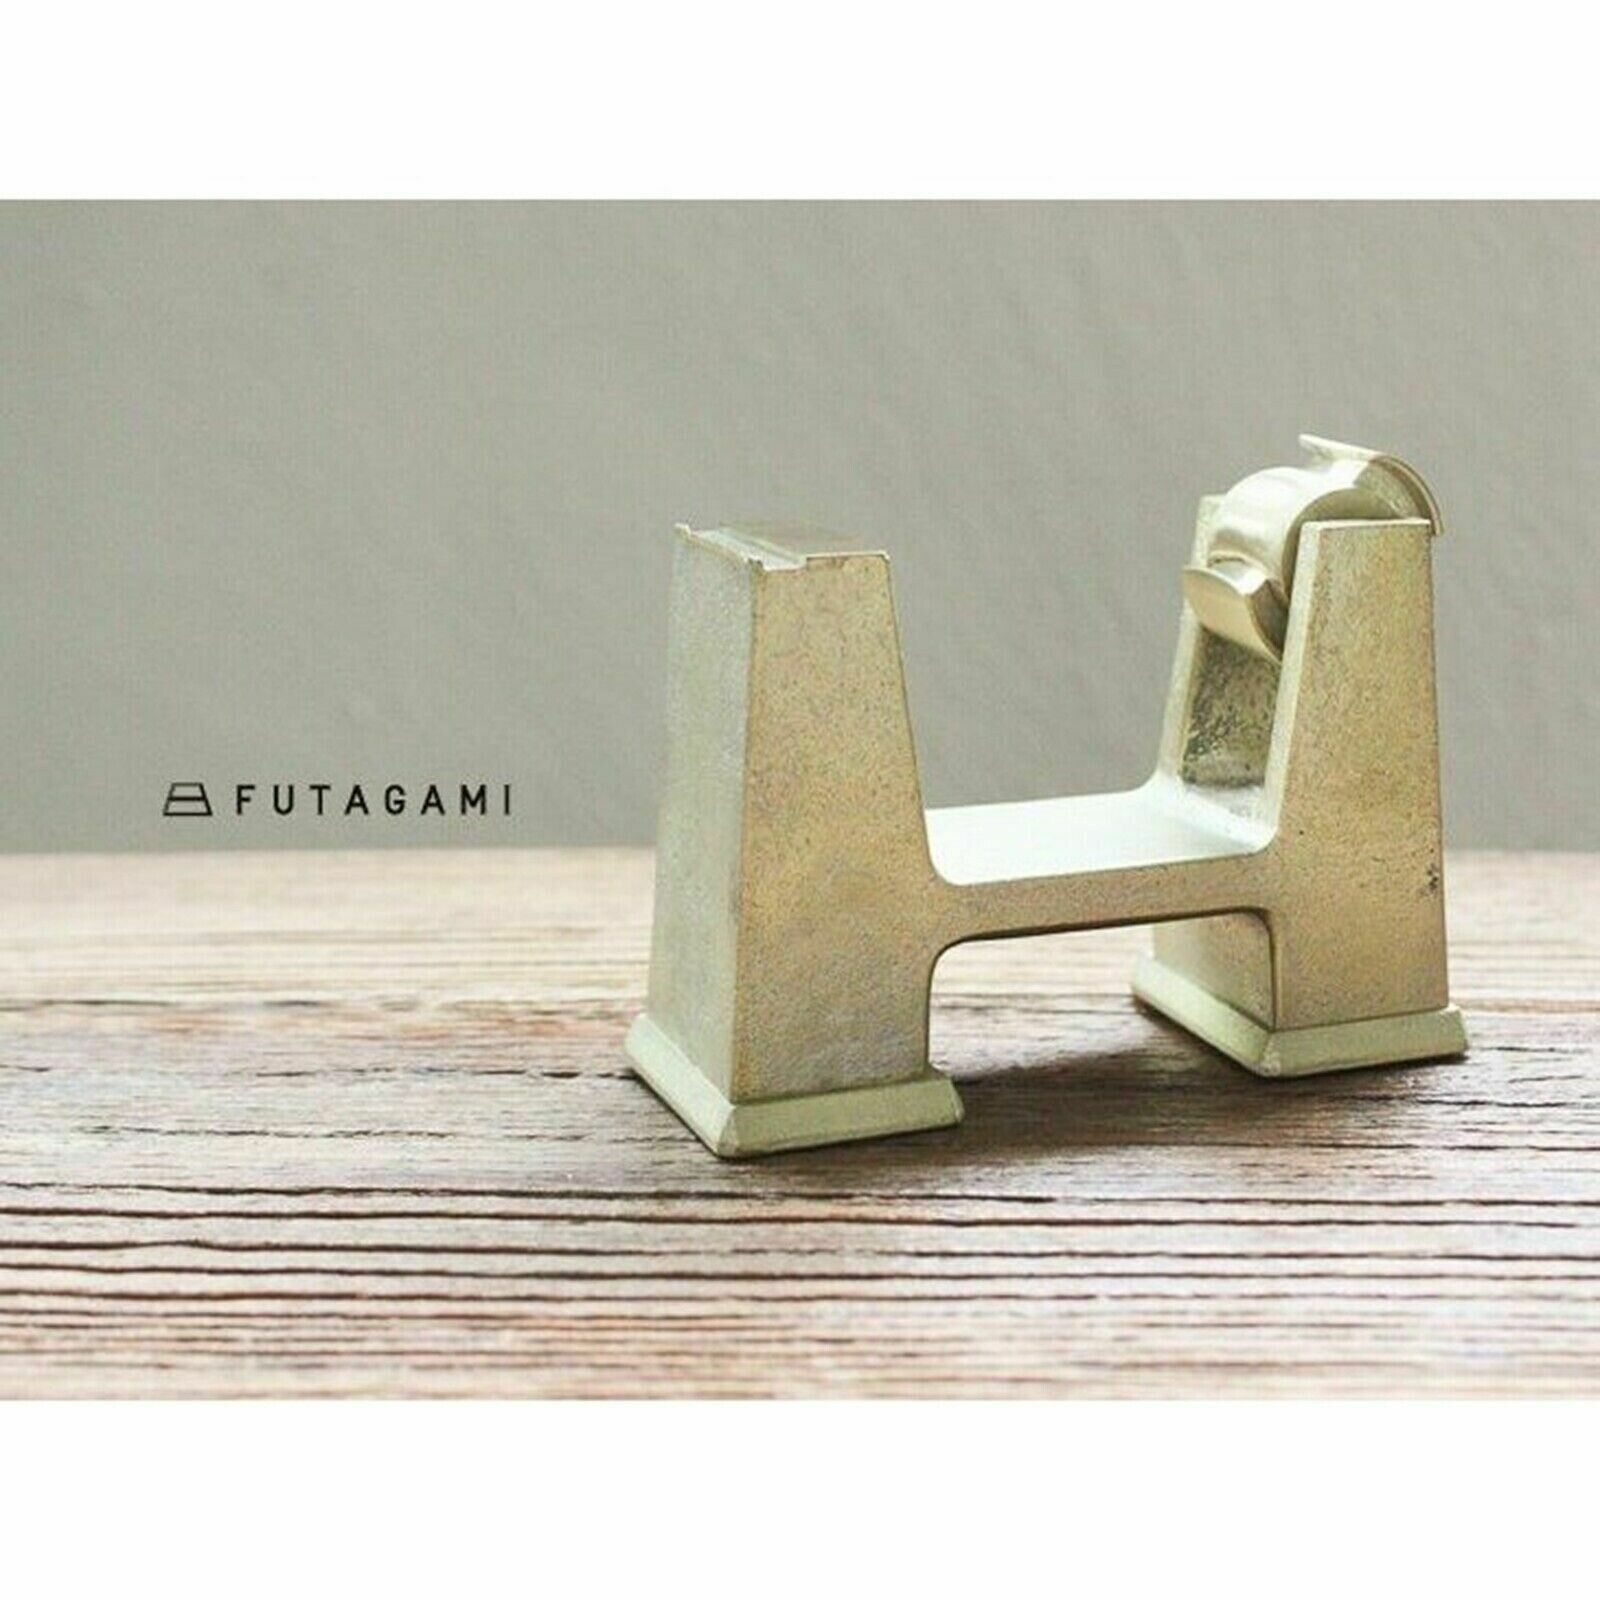 Futagami Brass Made Tape Dispenser Small Size Japan Traditional Craft New